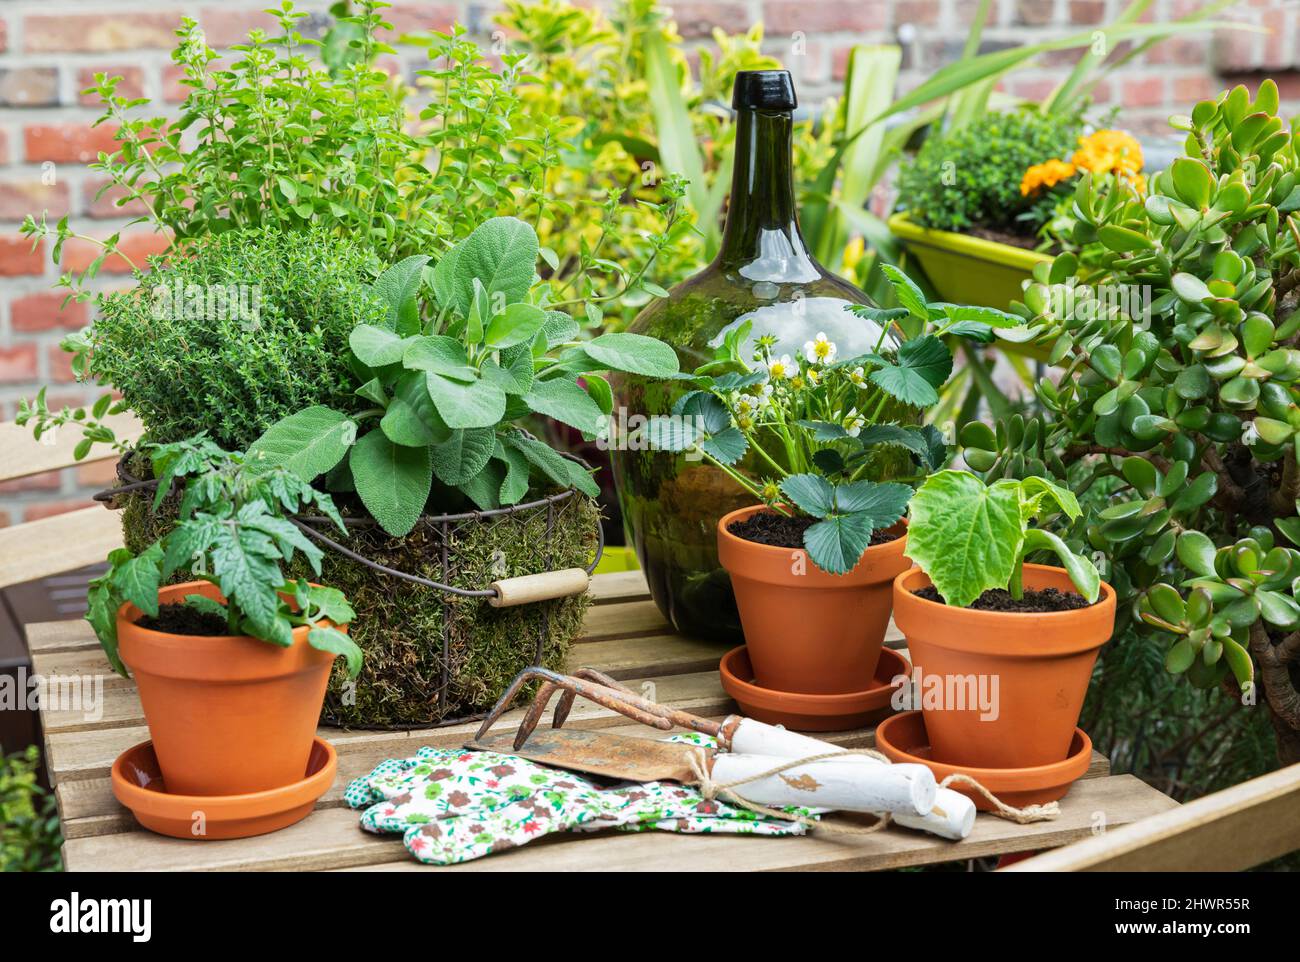 Green potted herbs cultivated on balcony table Stock Photo